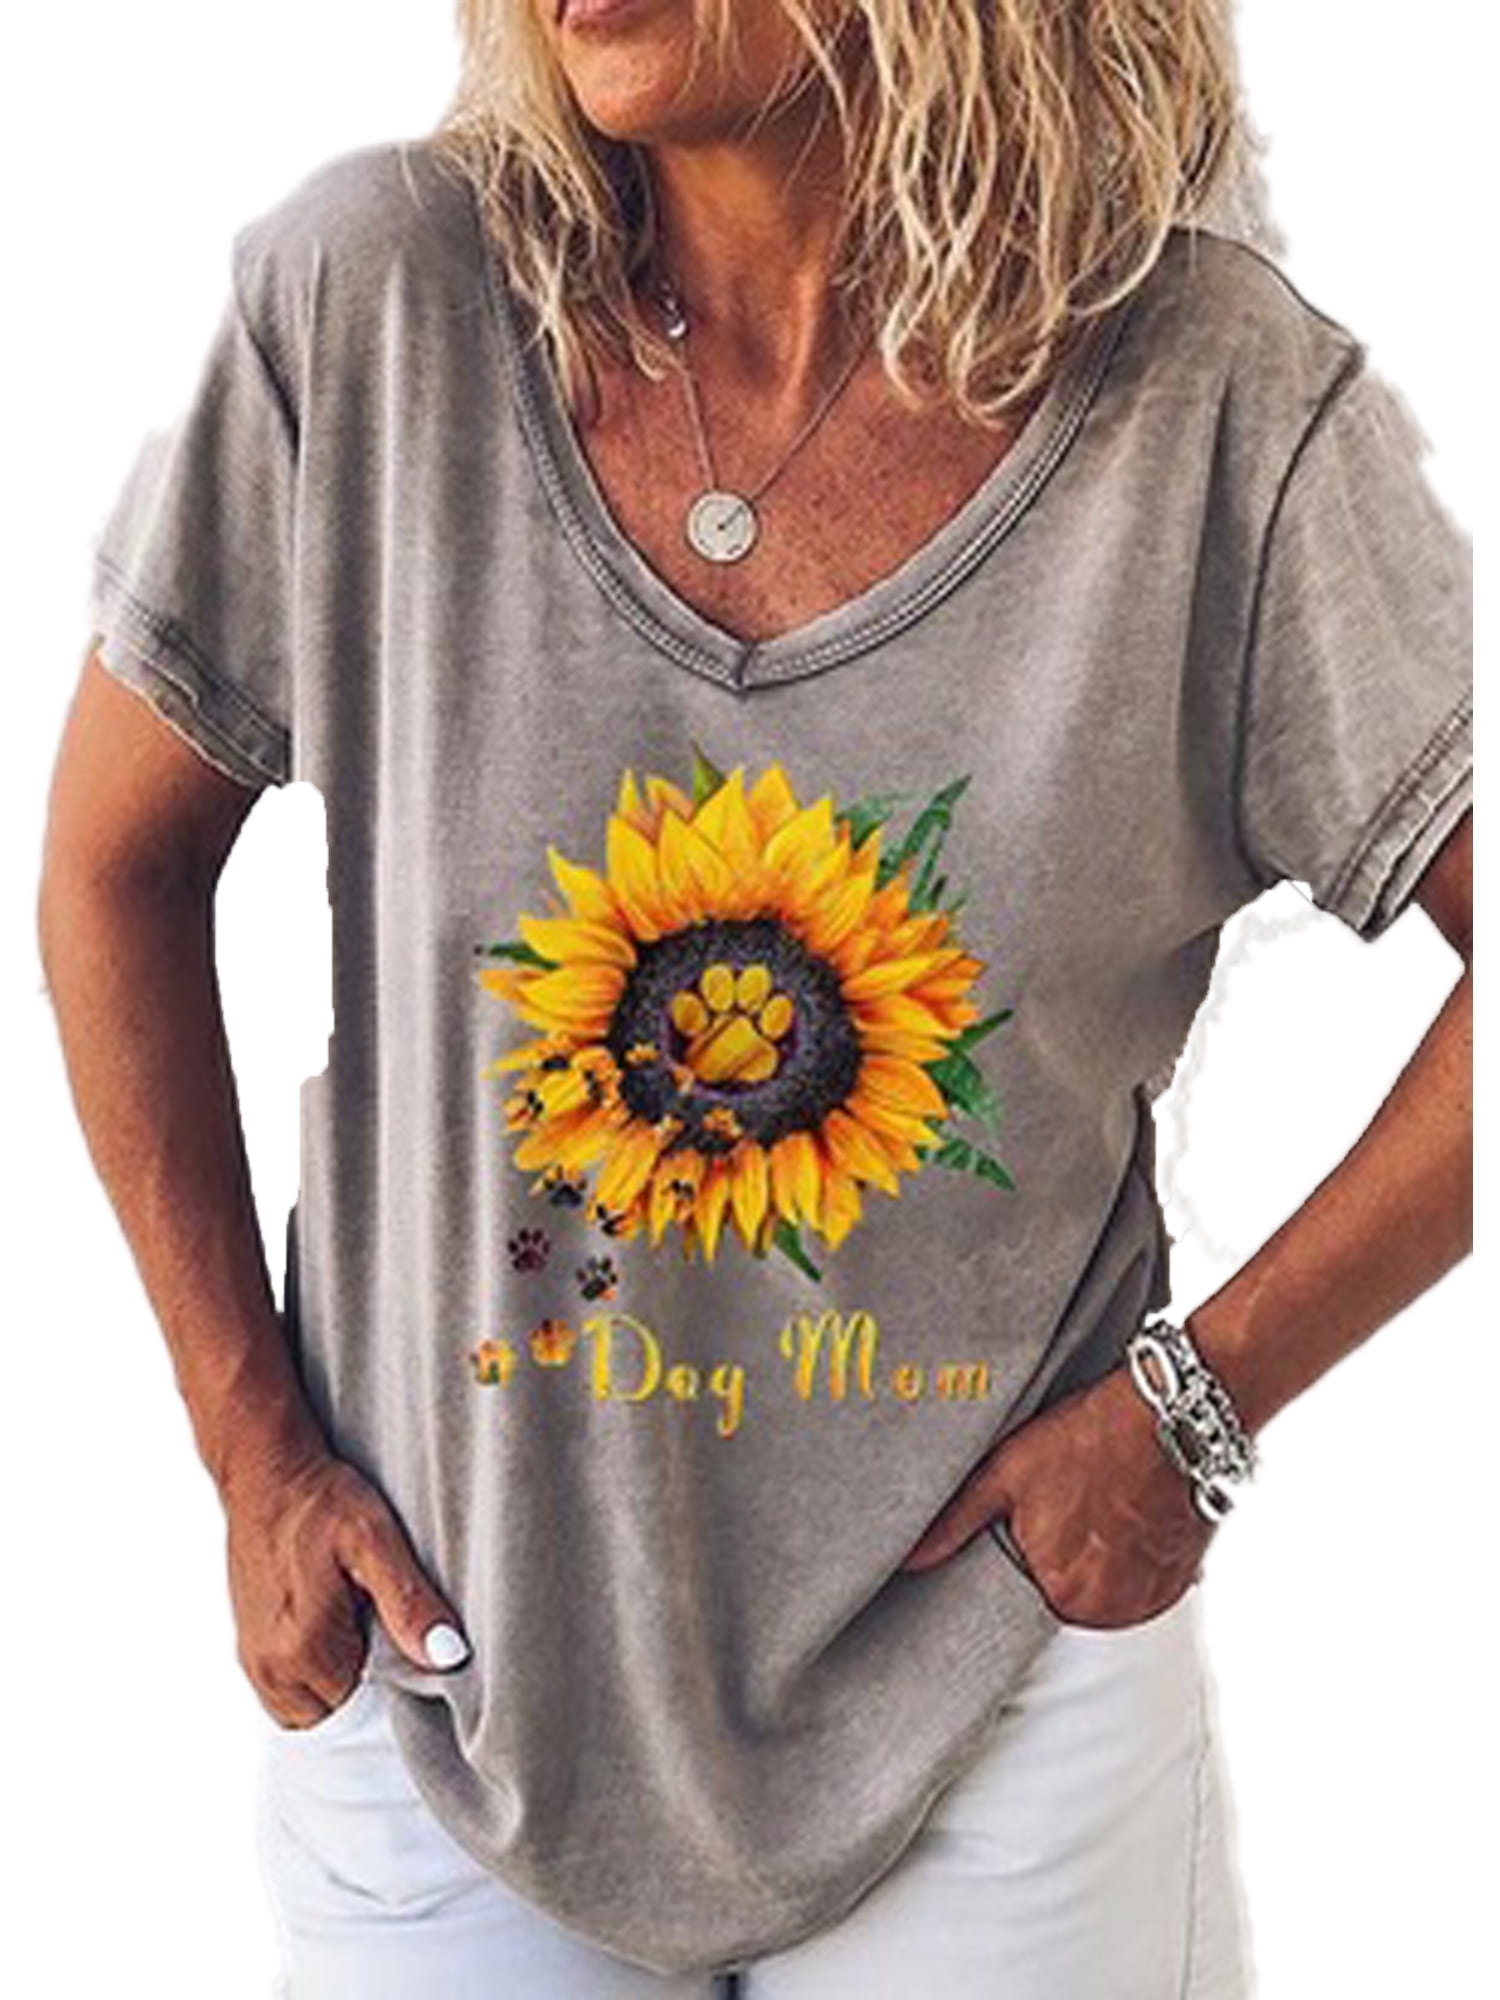 Summer Tops for Women Colorful Sunflower Graphic Tees Short Sleeve Crewneck T-Shirt Casual Loose Fit Shirts Blouses Tank Tops 